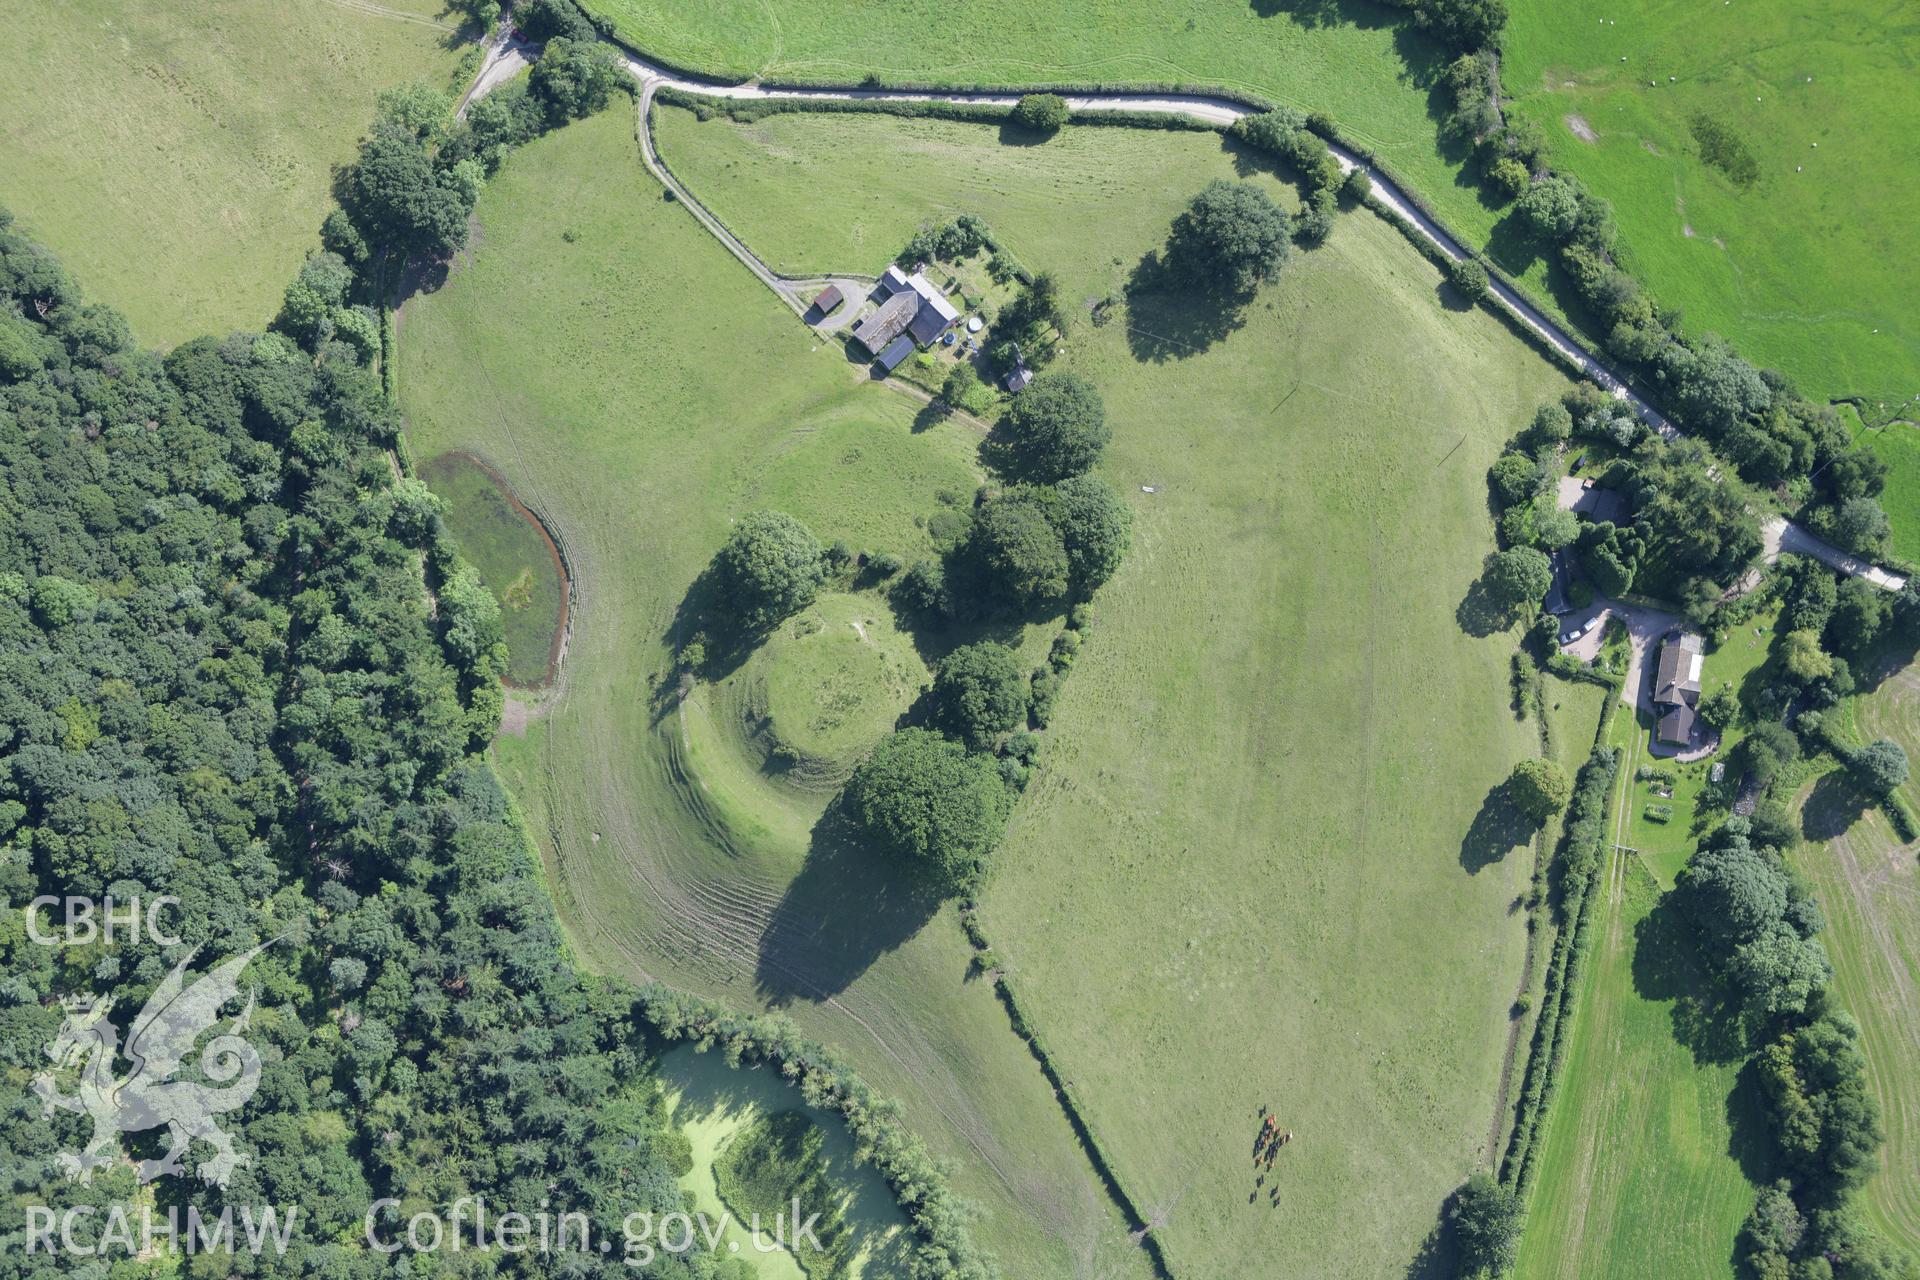 RCAHMW colour oblique aerial photograph of Sycharth Castle, Llansilin. Taken on 31 July 2007 by Toby Driver